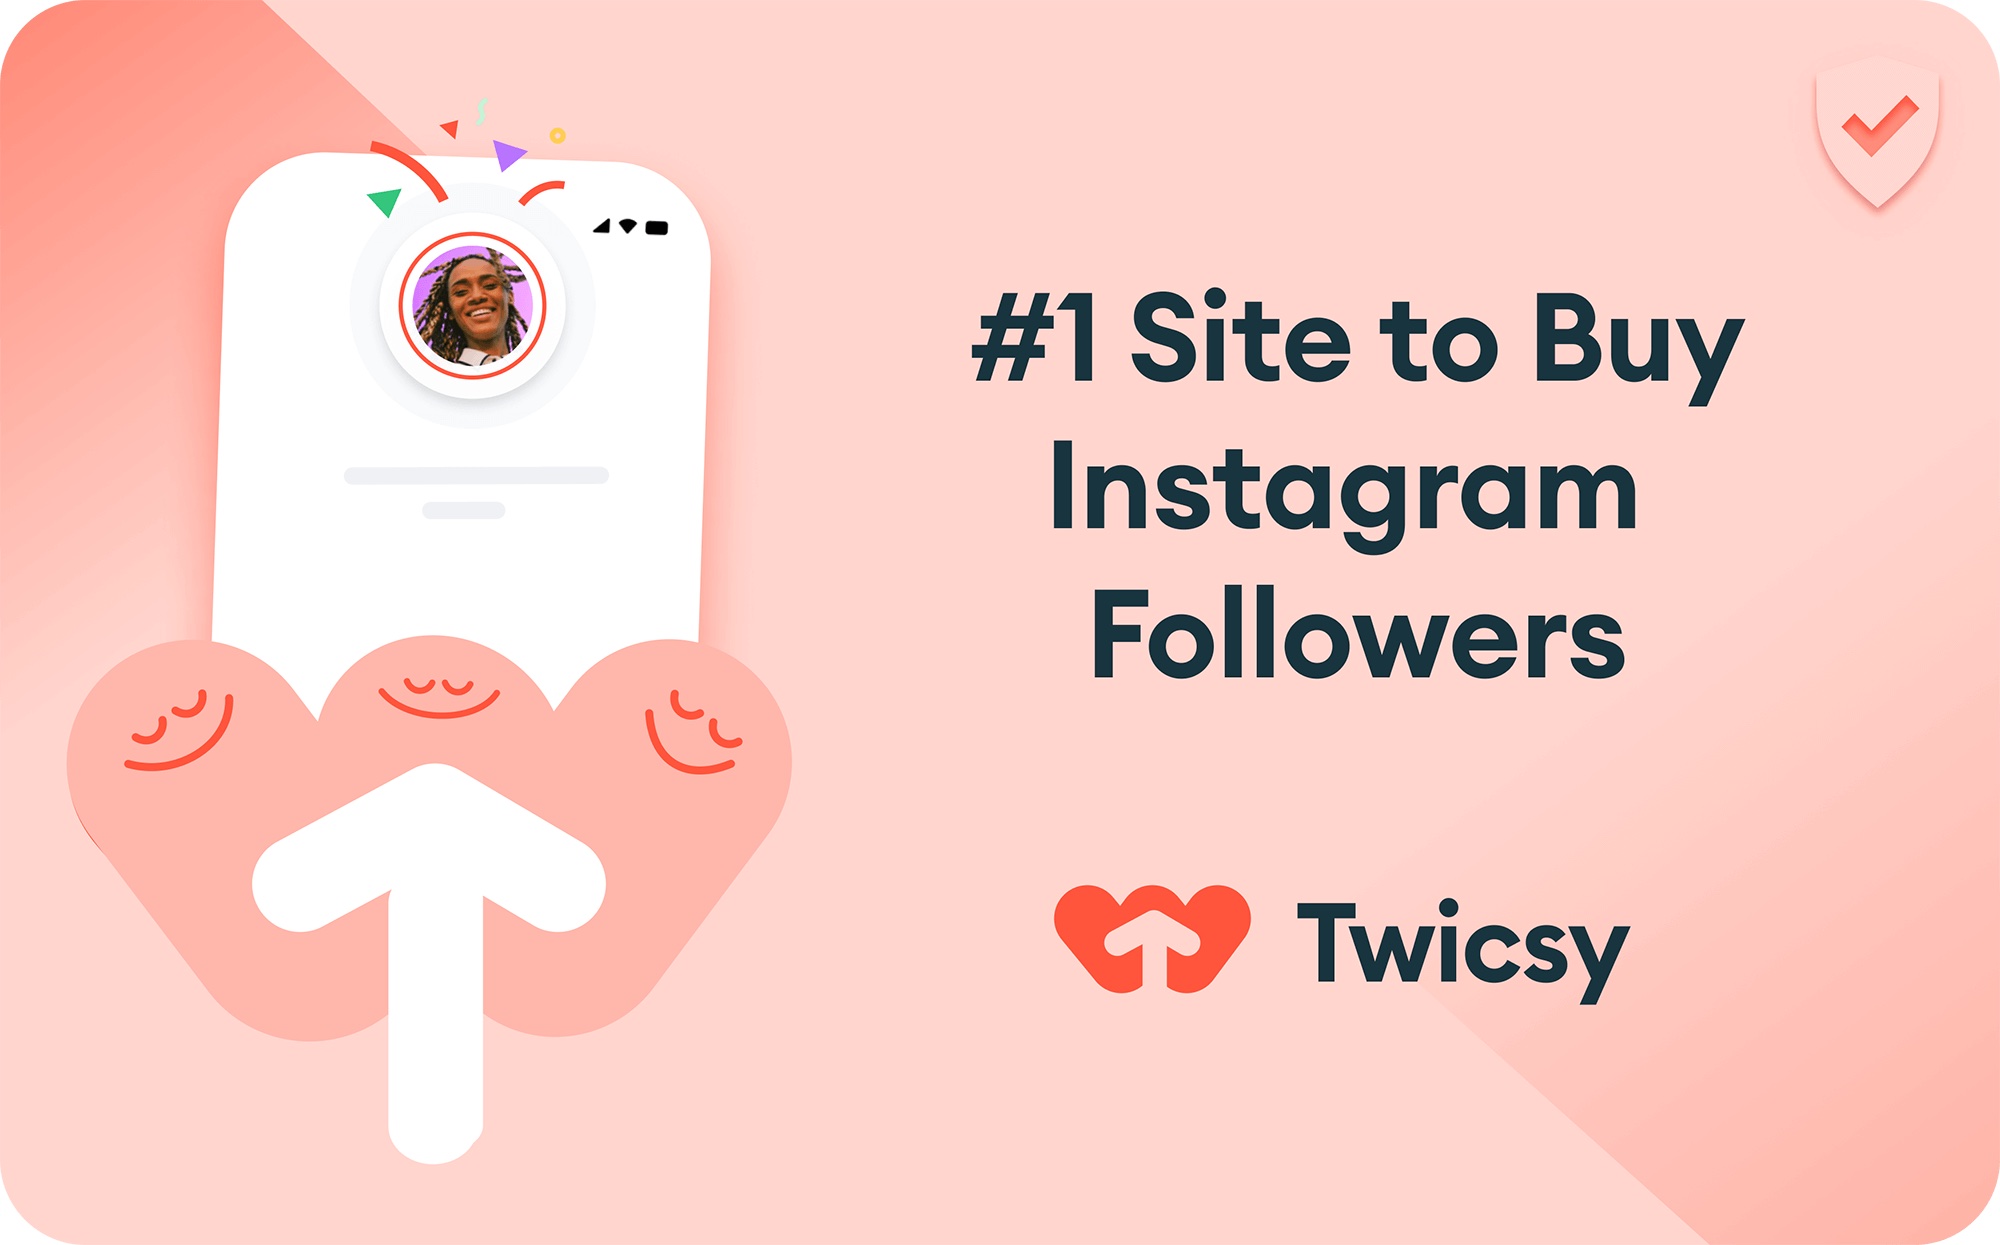 10 Creative Ways To Increase Your Instagram Likes